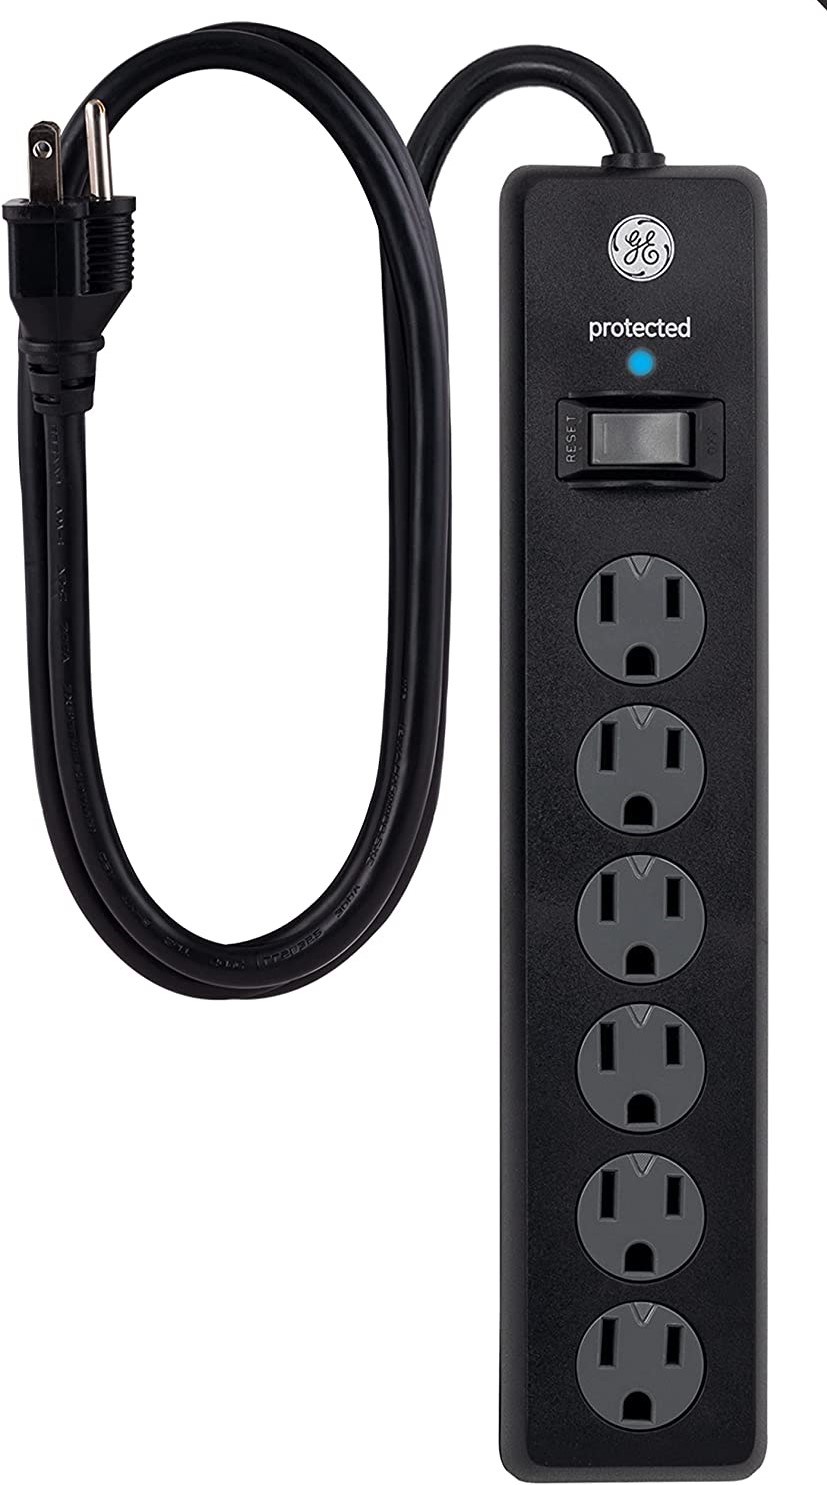 6-OUTLET-SURGE-PROTECTOR-3-METER-CORD -1